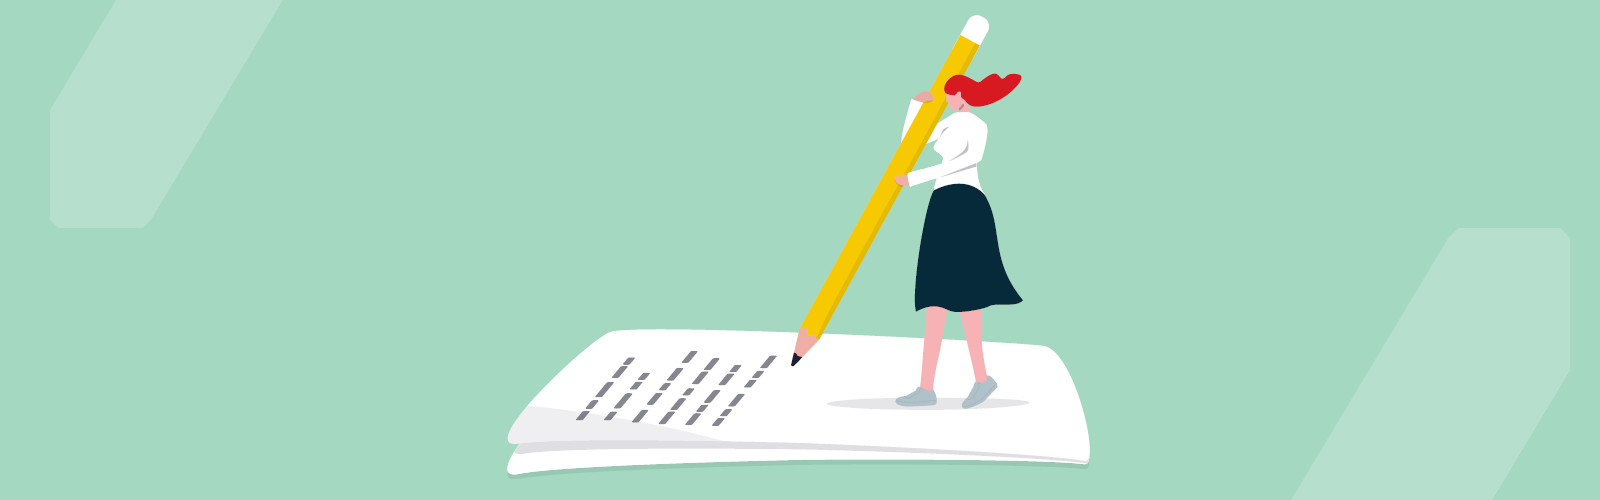 Illustration: a figure holding a human-sized pencil, writing a letter